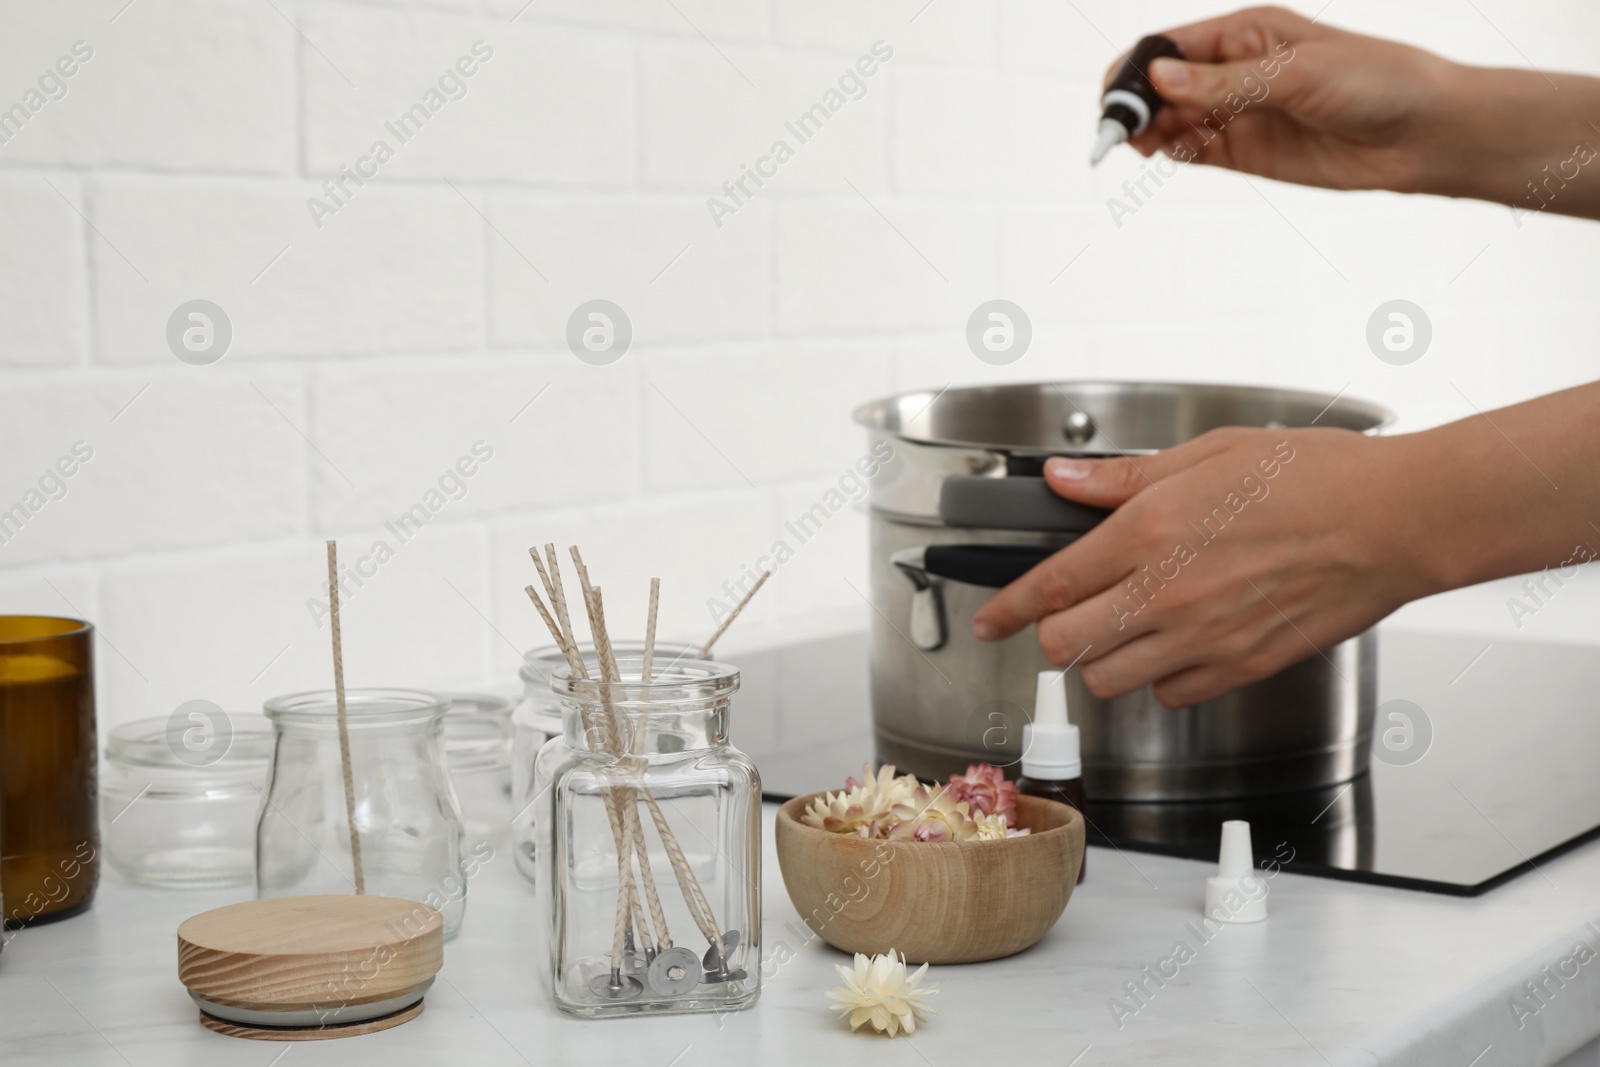 Photo of Woman preparing wax in kitchen, focus on jars with wicks and dry flowers. Making homemade candles